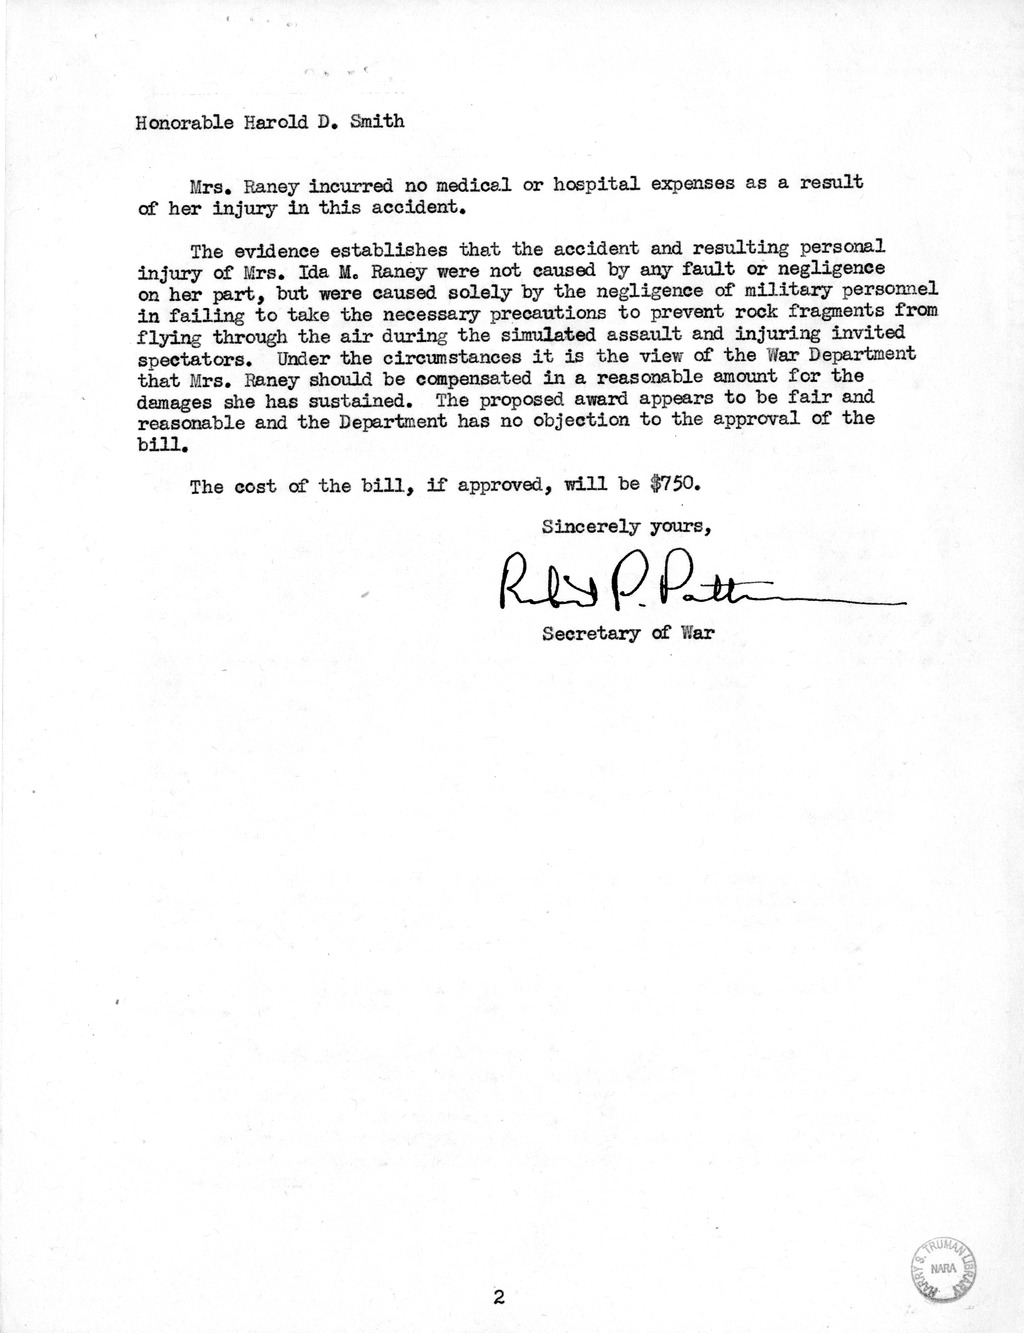 Memorandum from Frederick J. Bailey to M. C. Latta, S. 684, For the Relief of Ida M. Raney, with Attachments